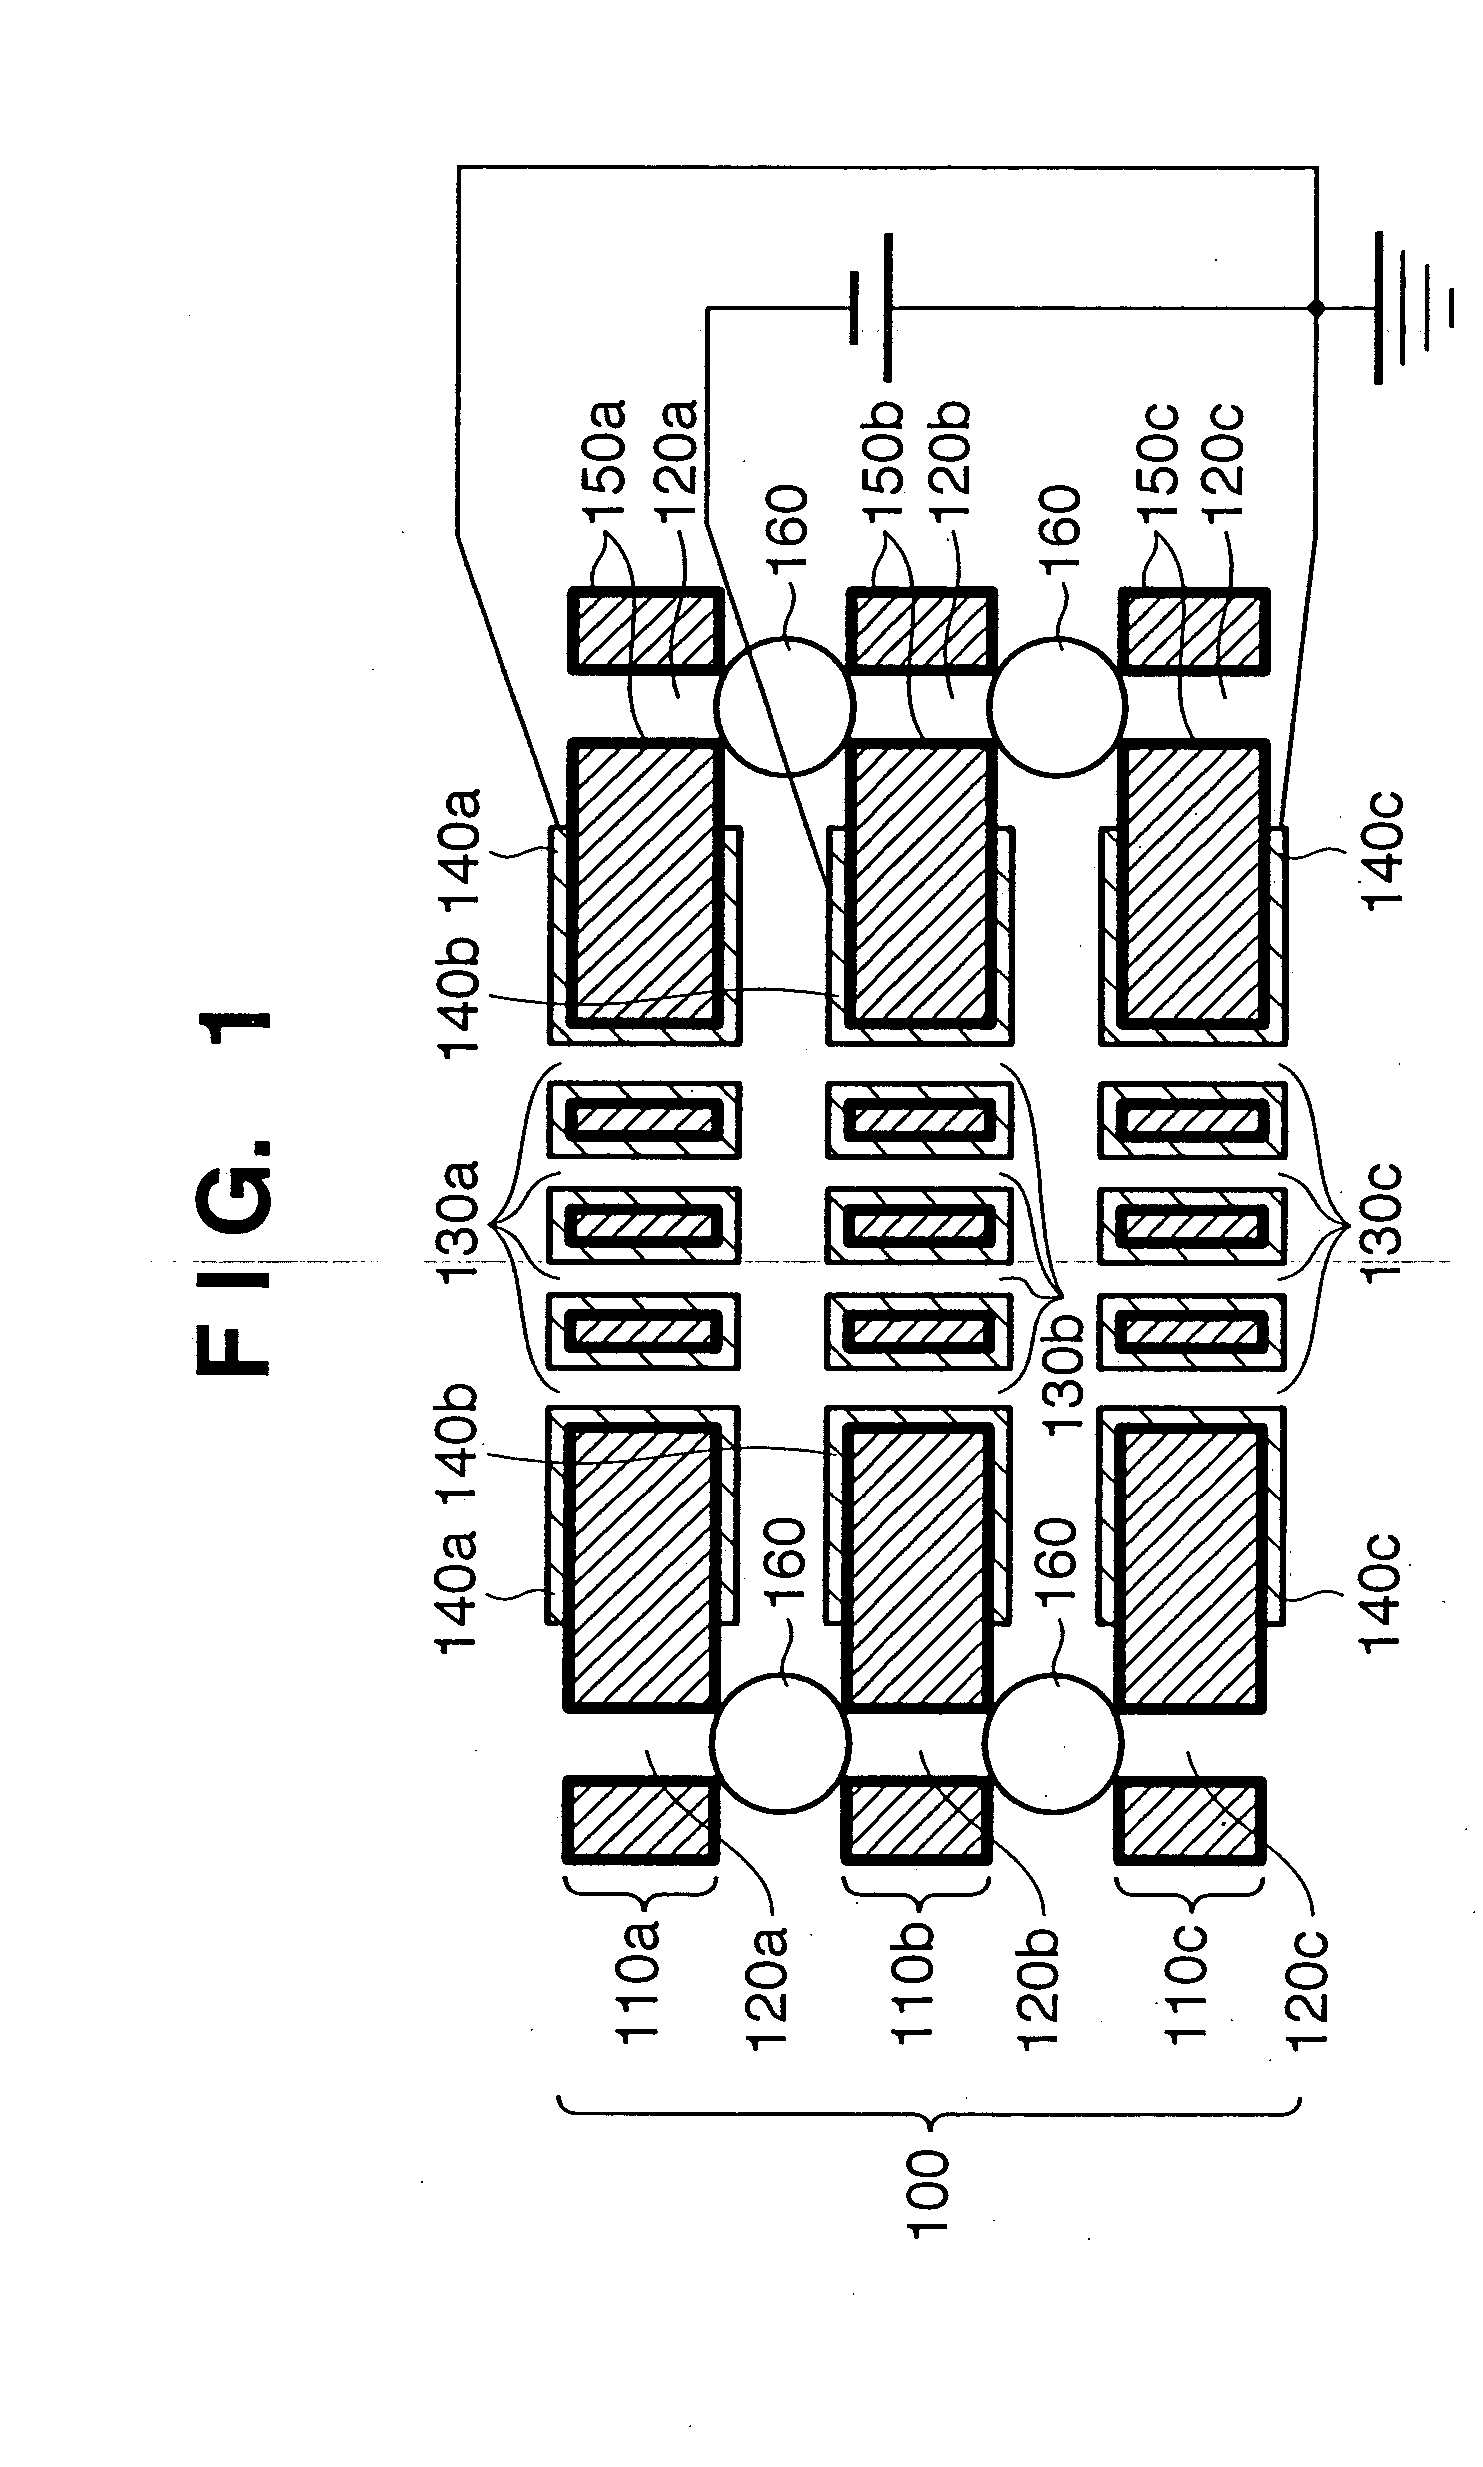 Multi-charged beam lens and charged beam exposure apparatus using the same